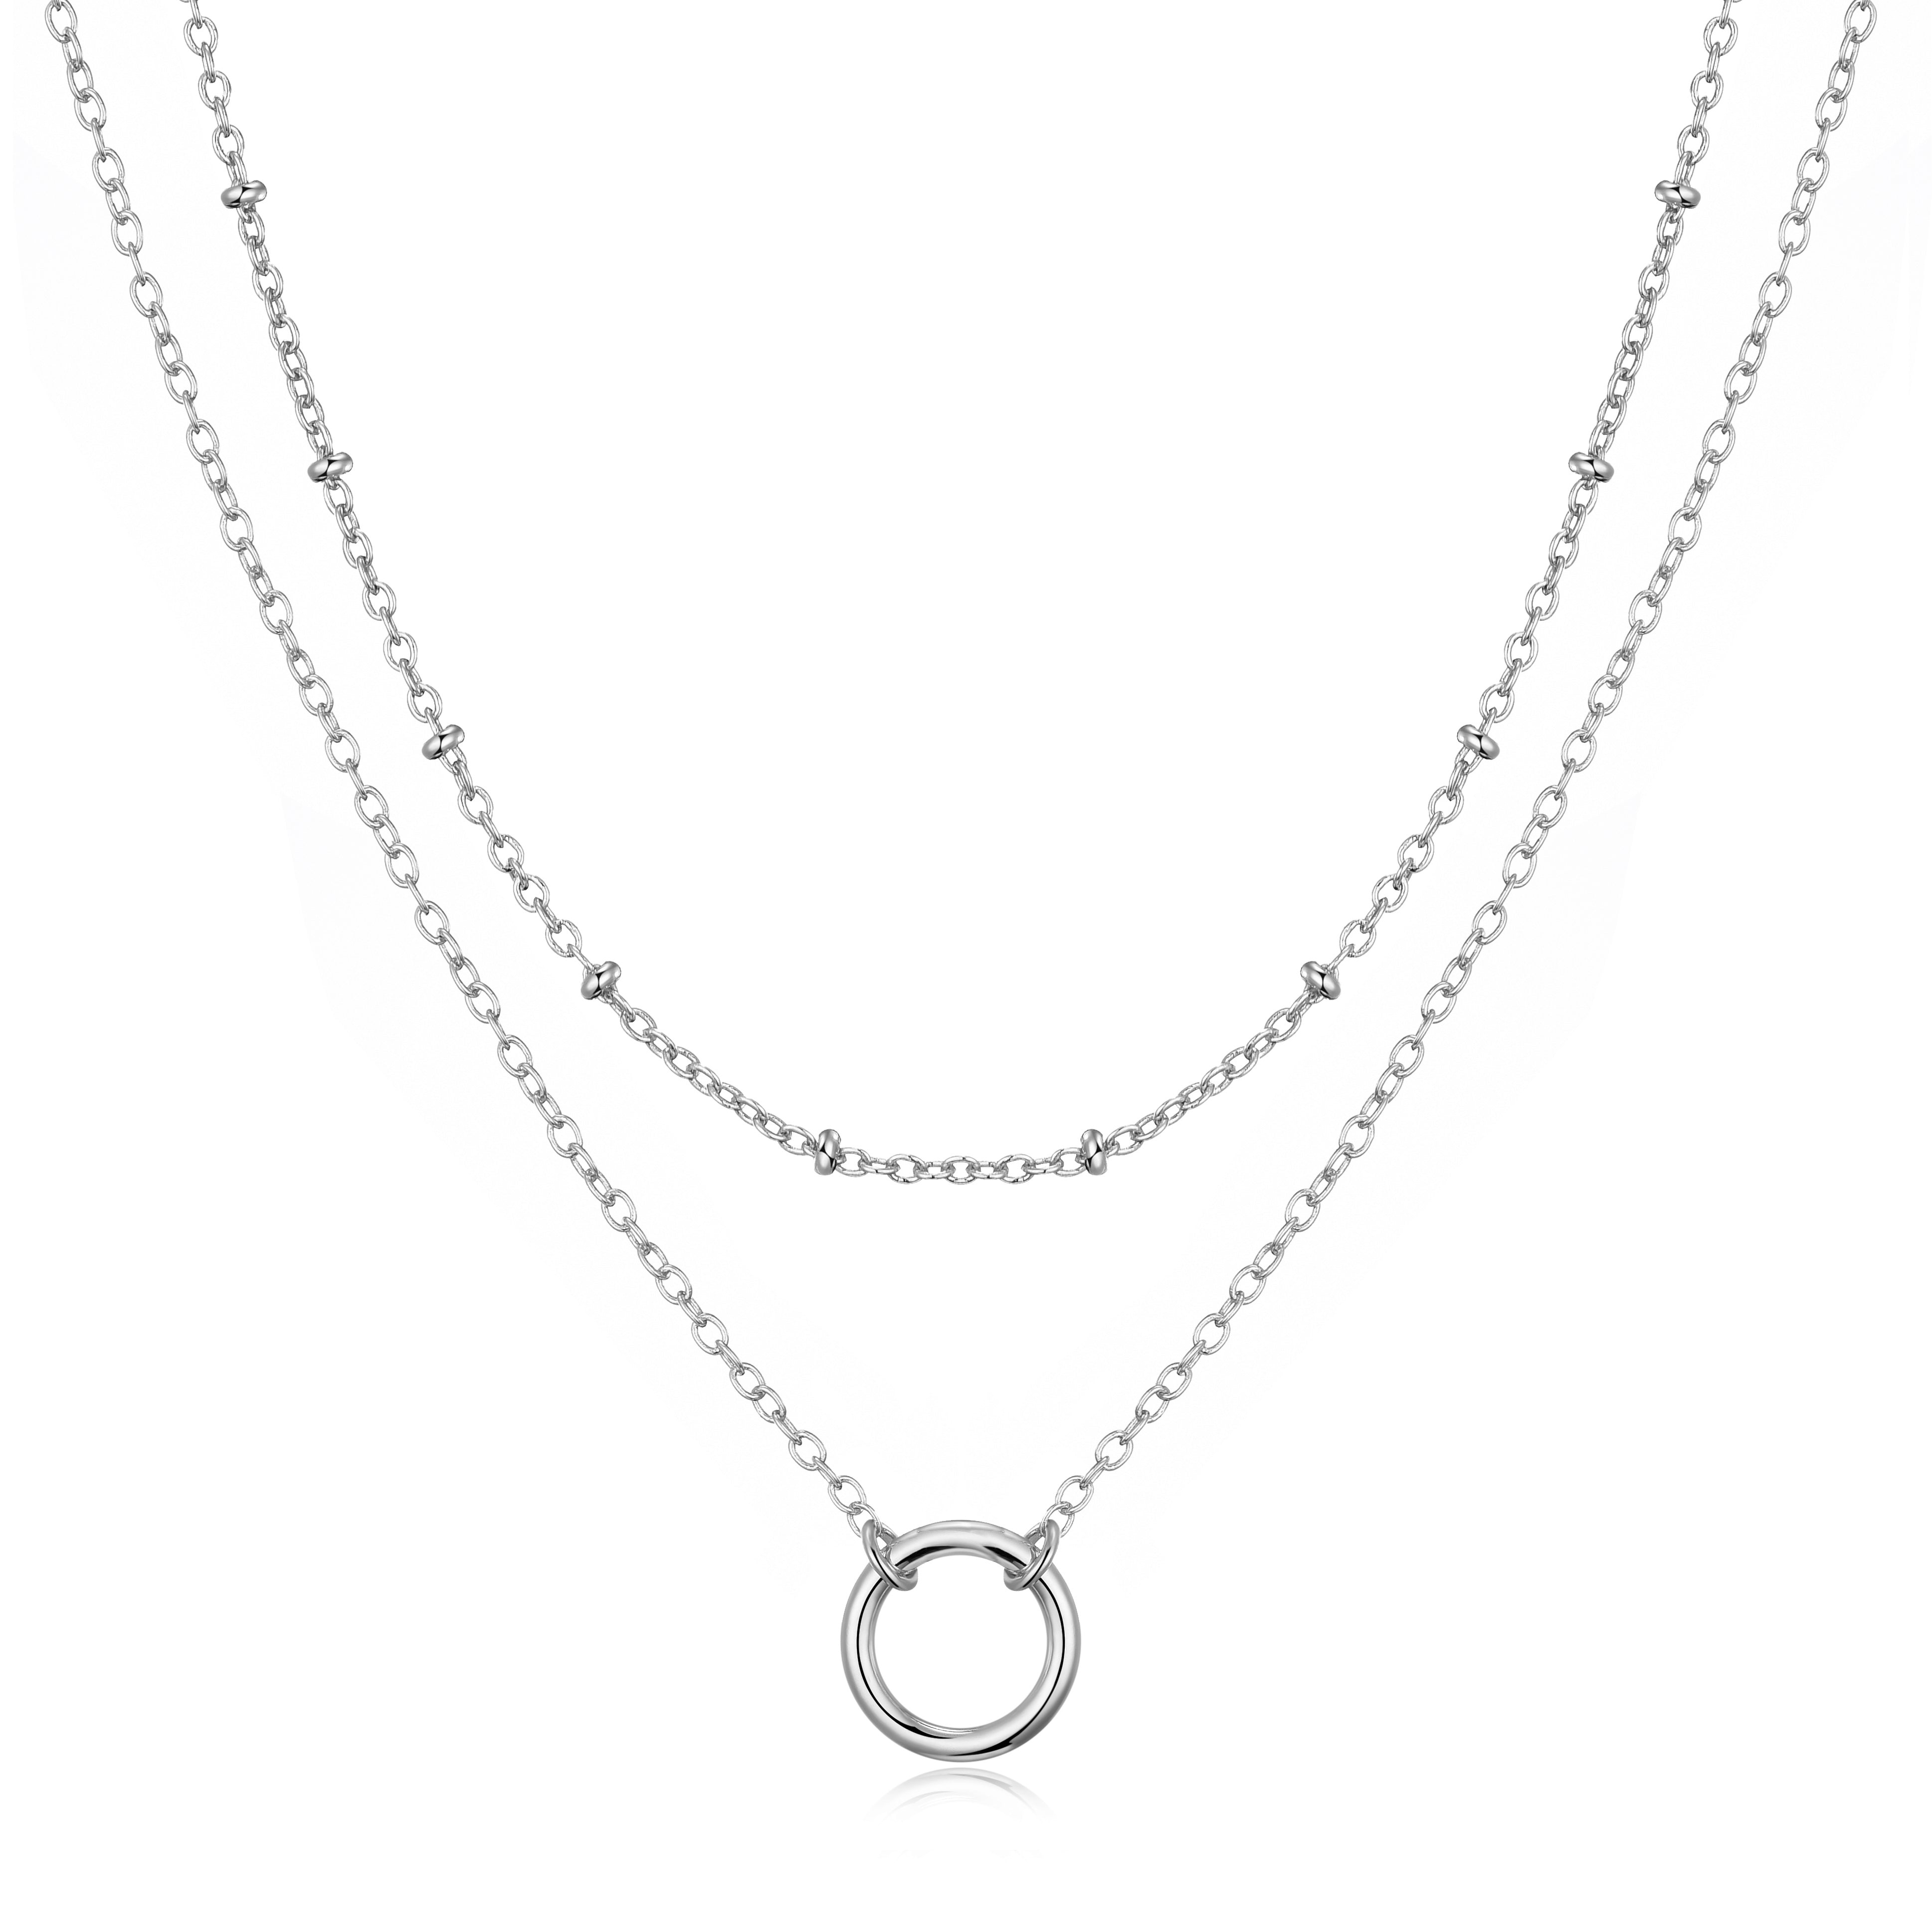 Silver Plated Double Layered Circle Necklace by Philip Jones Jewellery